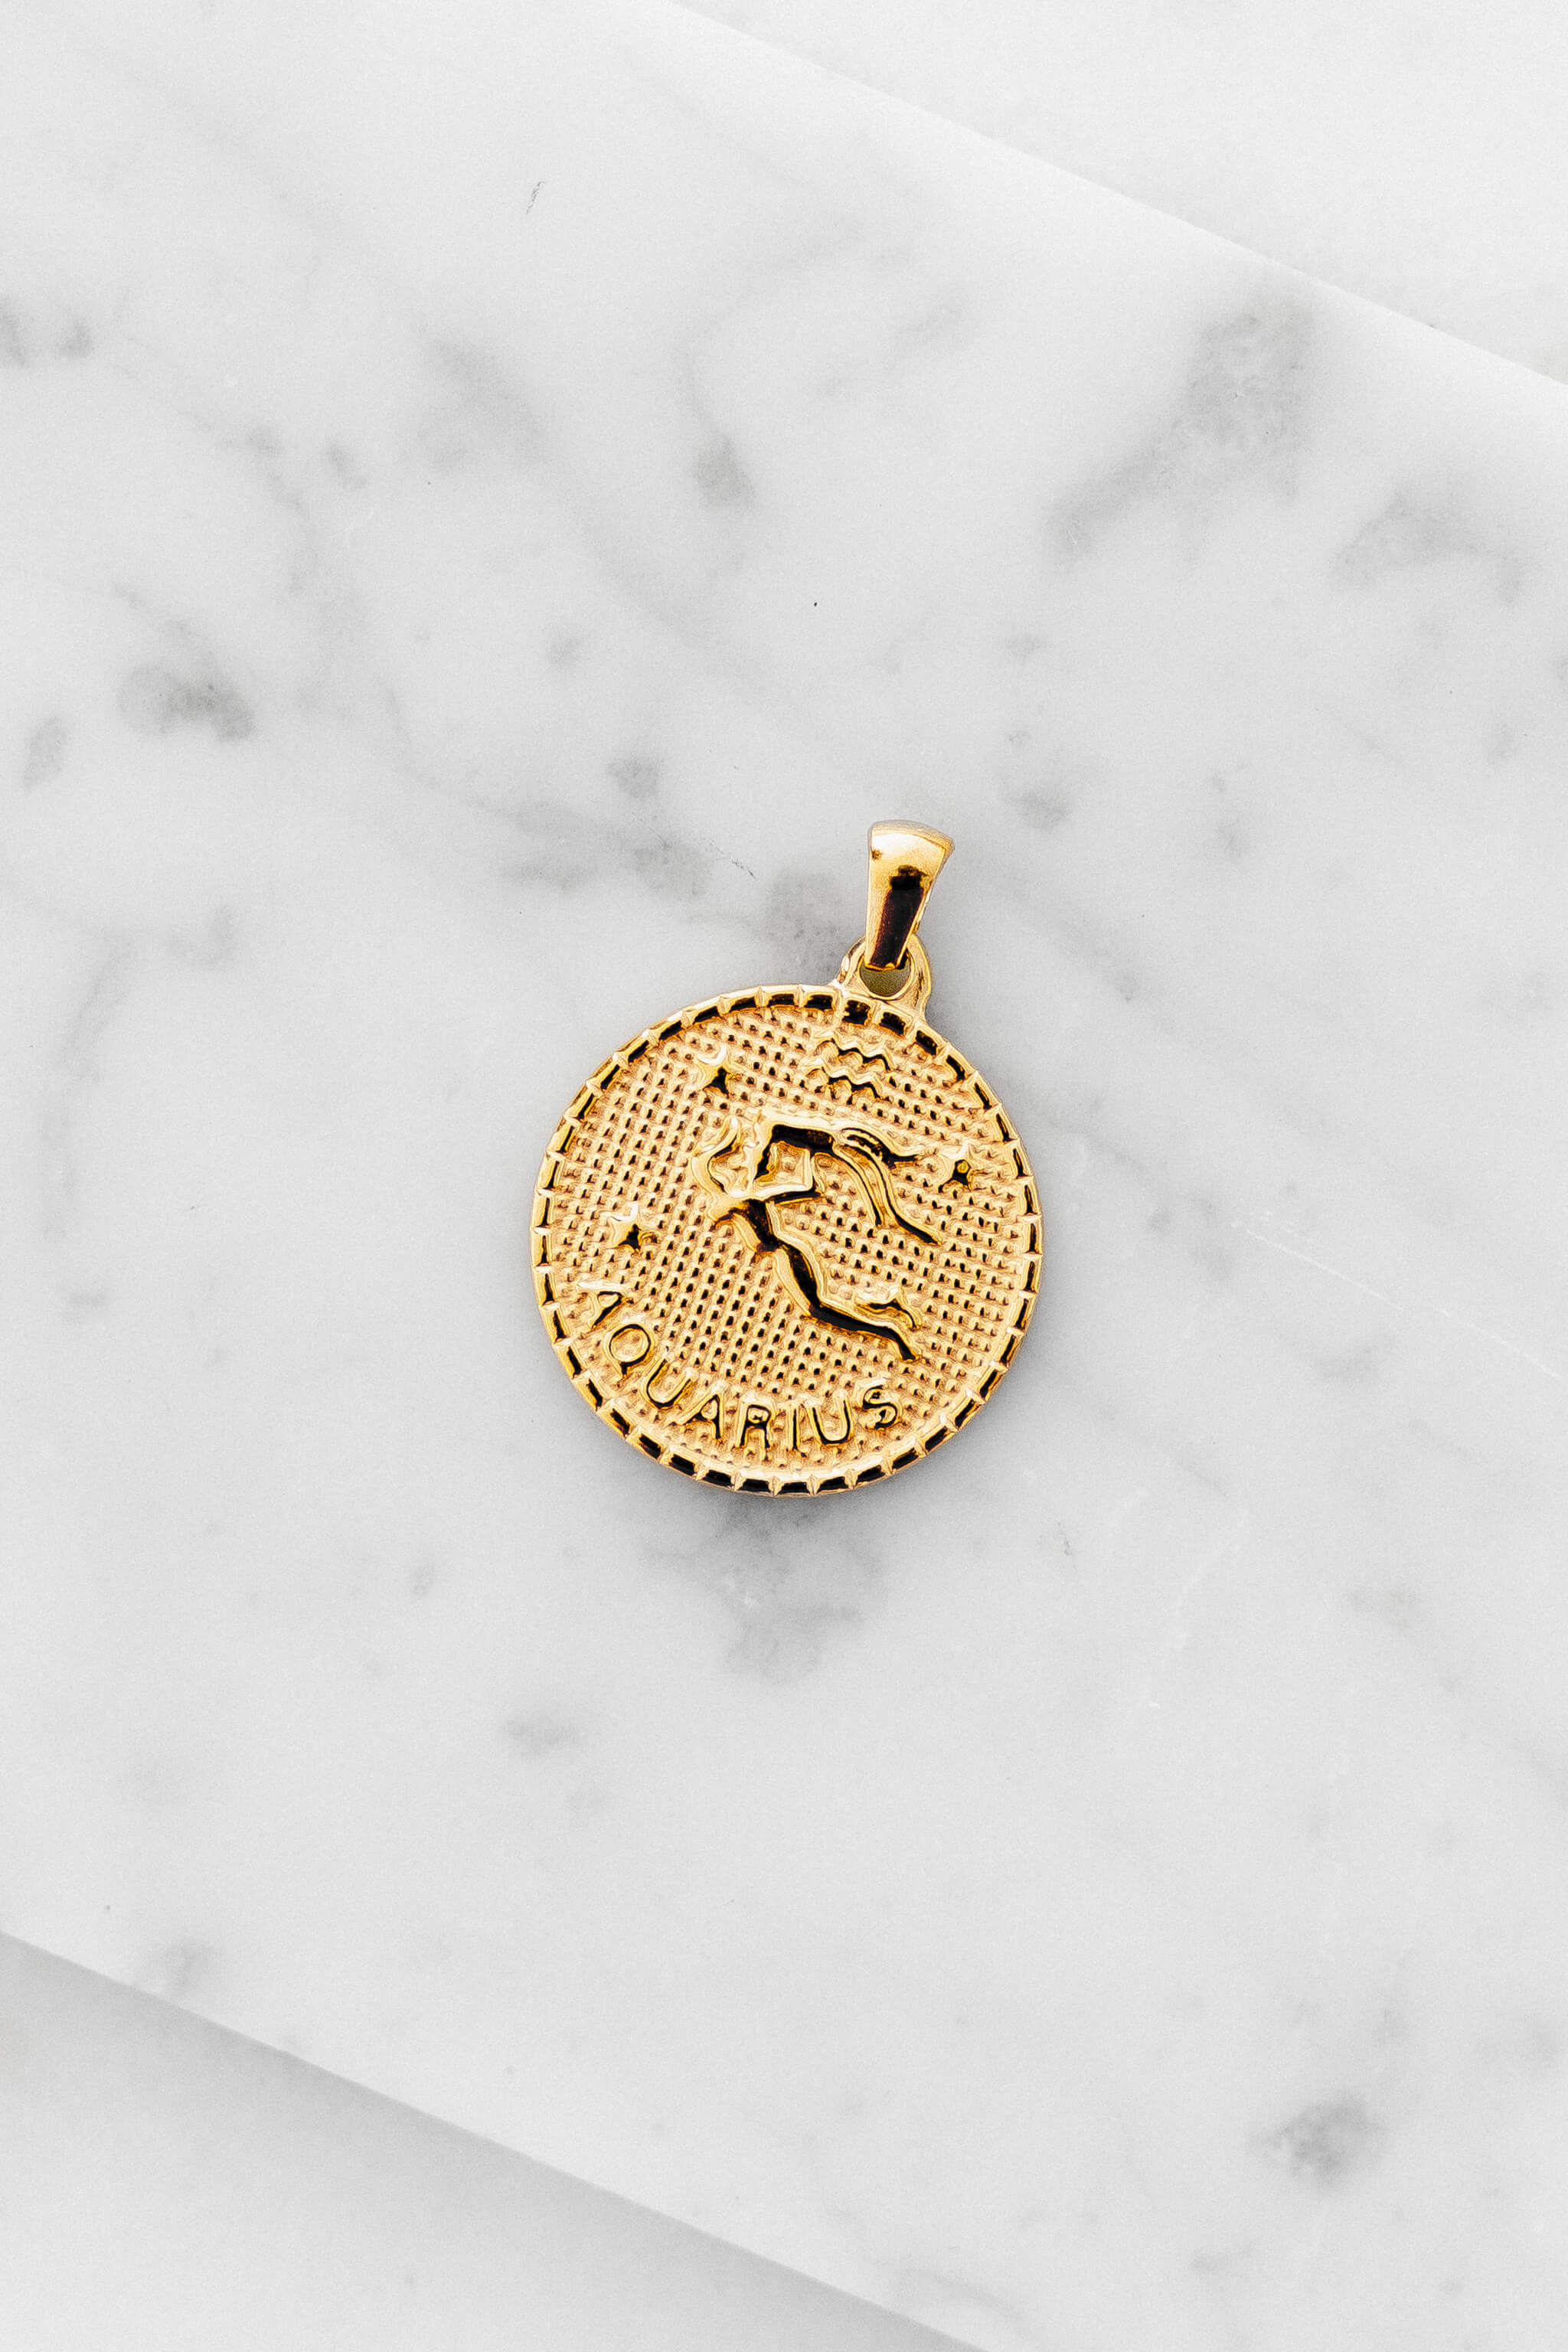 Aquarius zodiac sign gold coin charm laying on a white marble